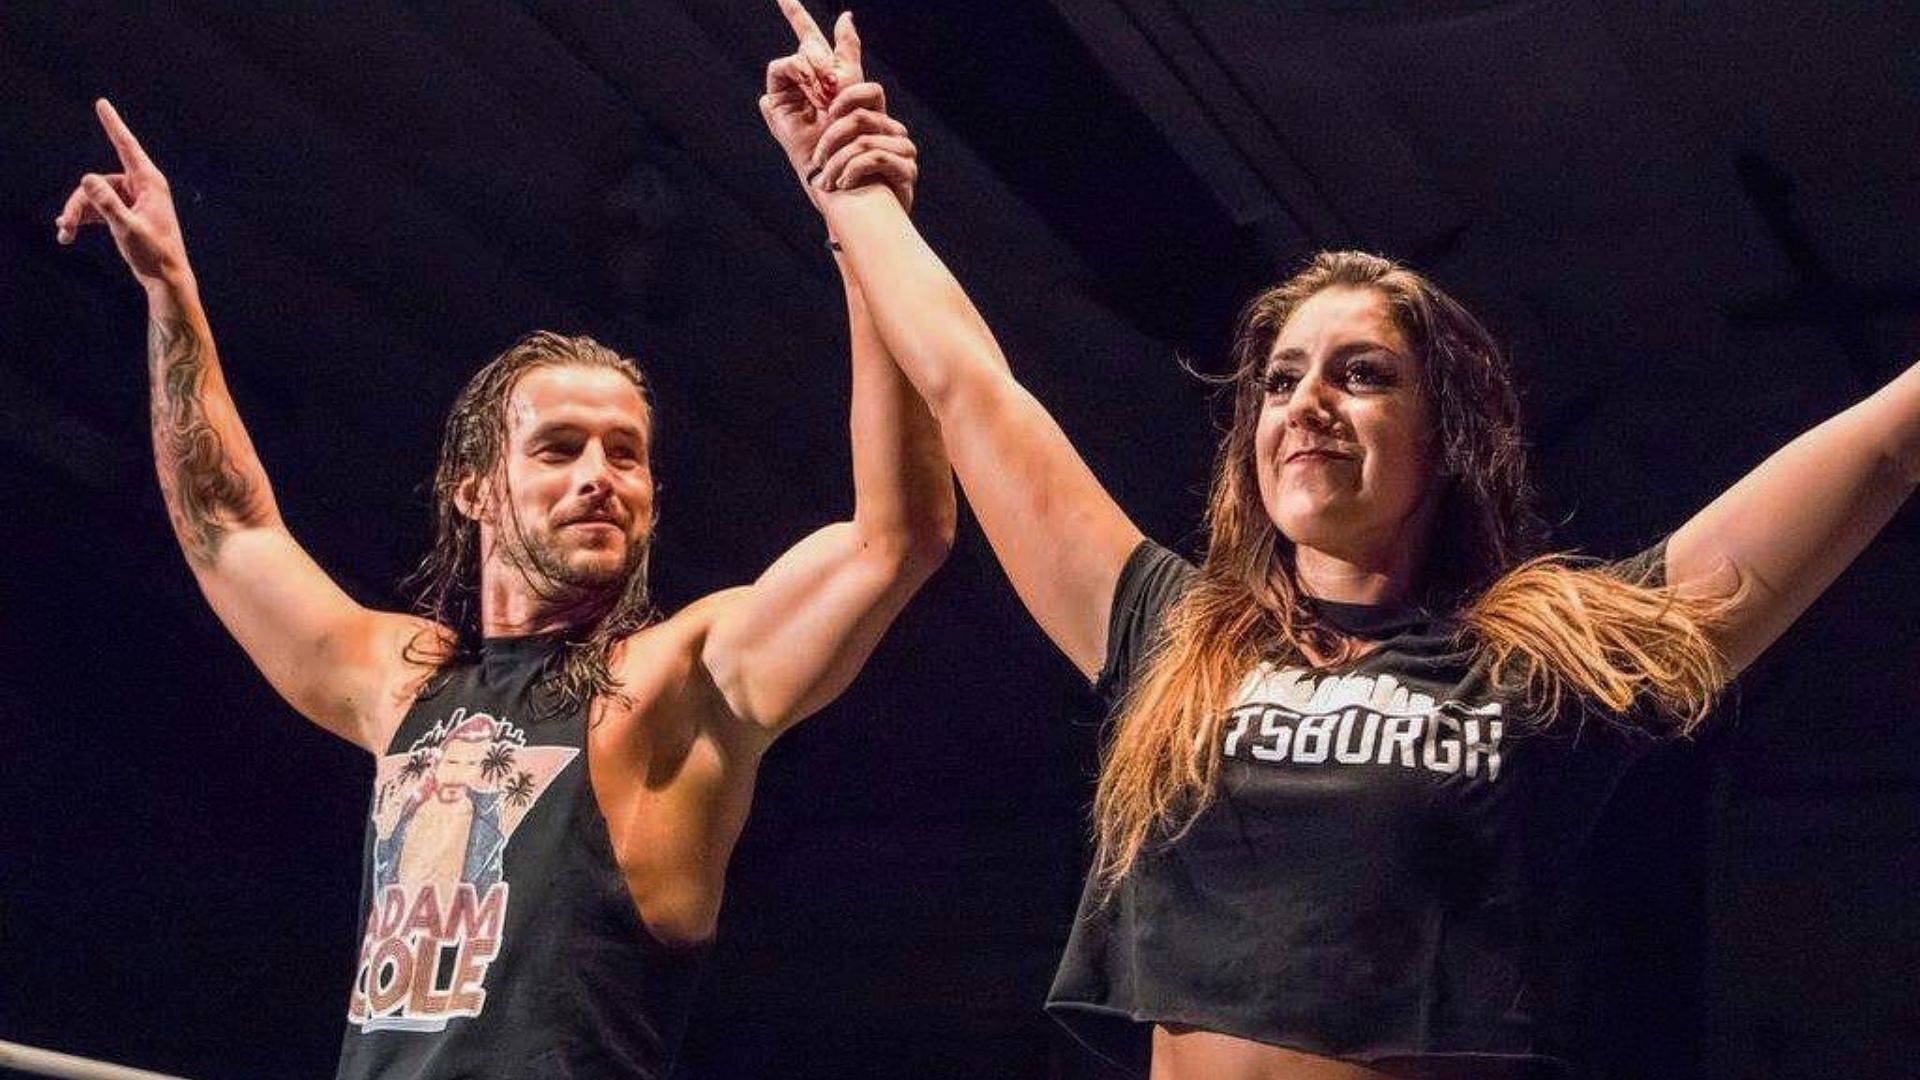 Adam Cole and Britt Baker are real-life partners, and AEW stars